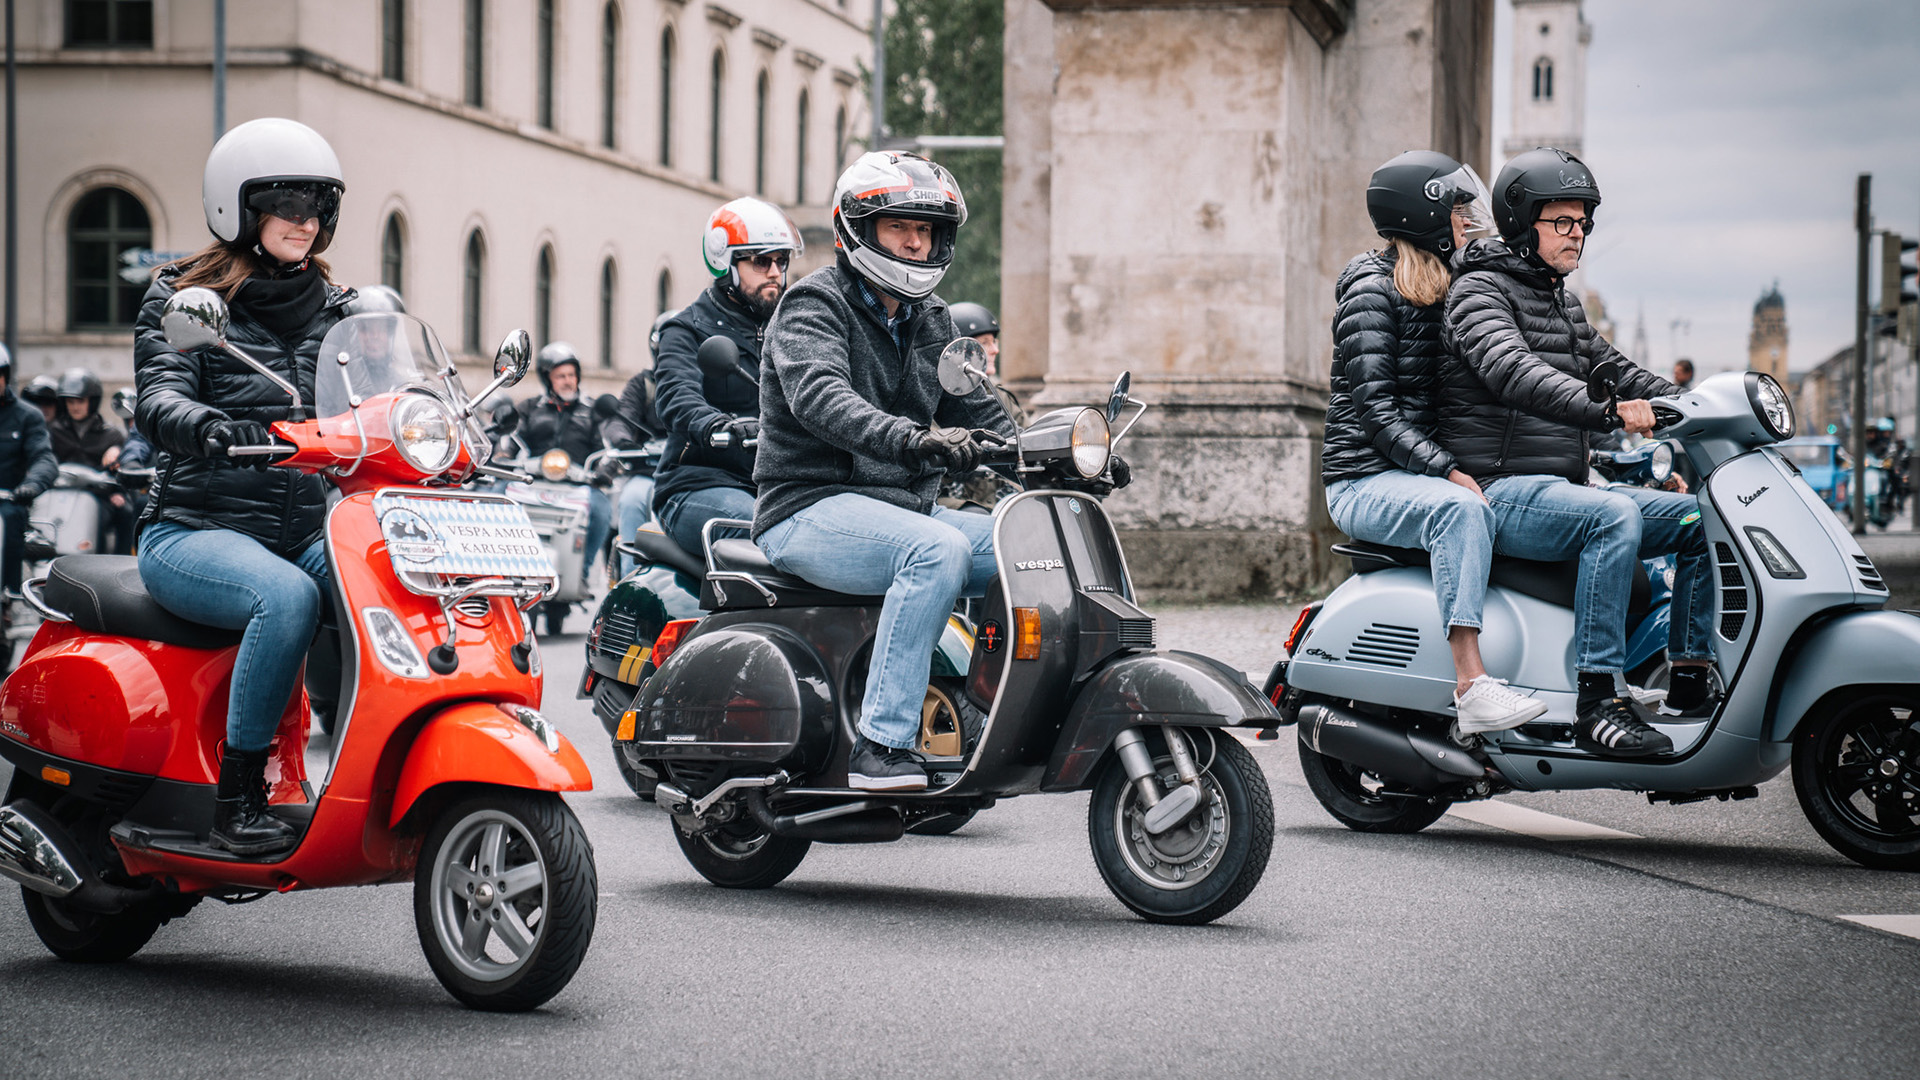 New papers for the Vespa – clearance certificate